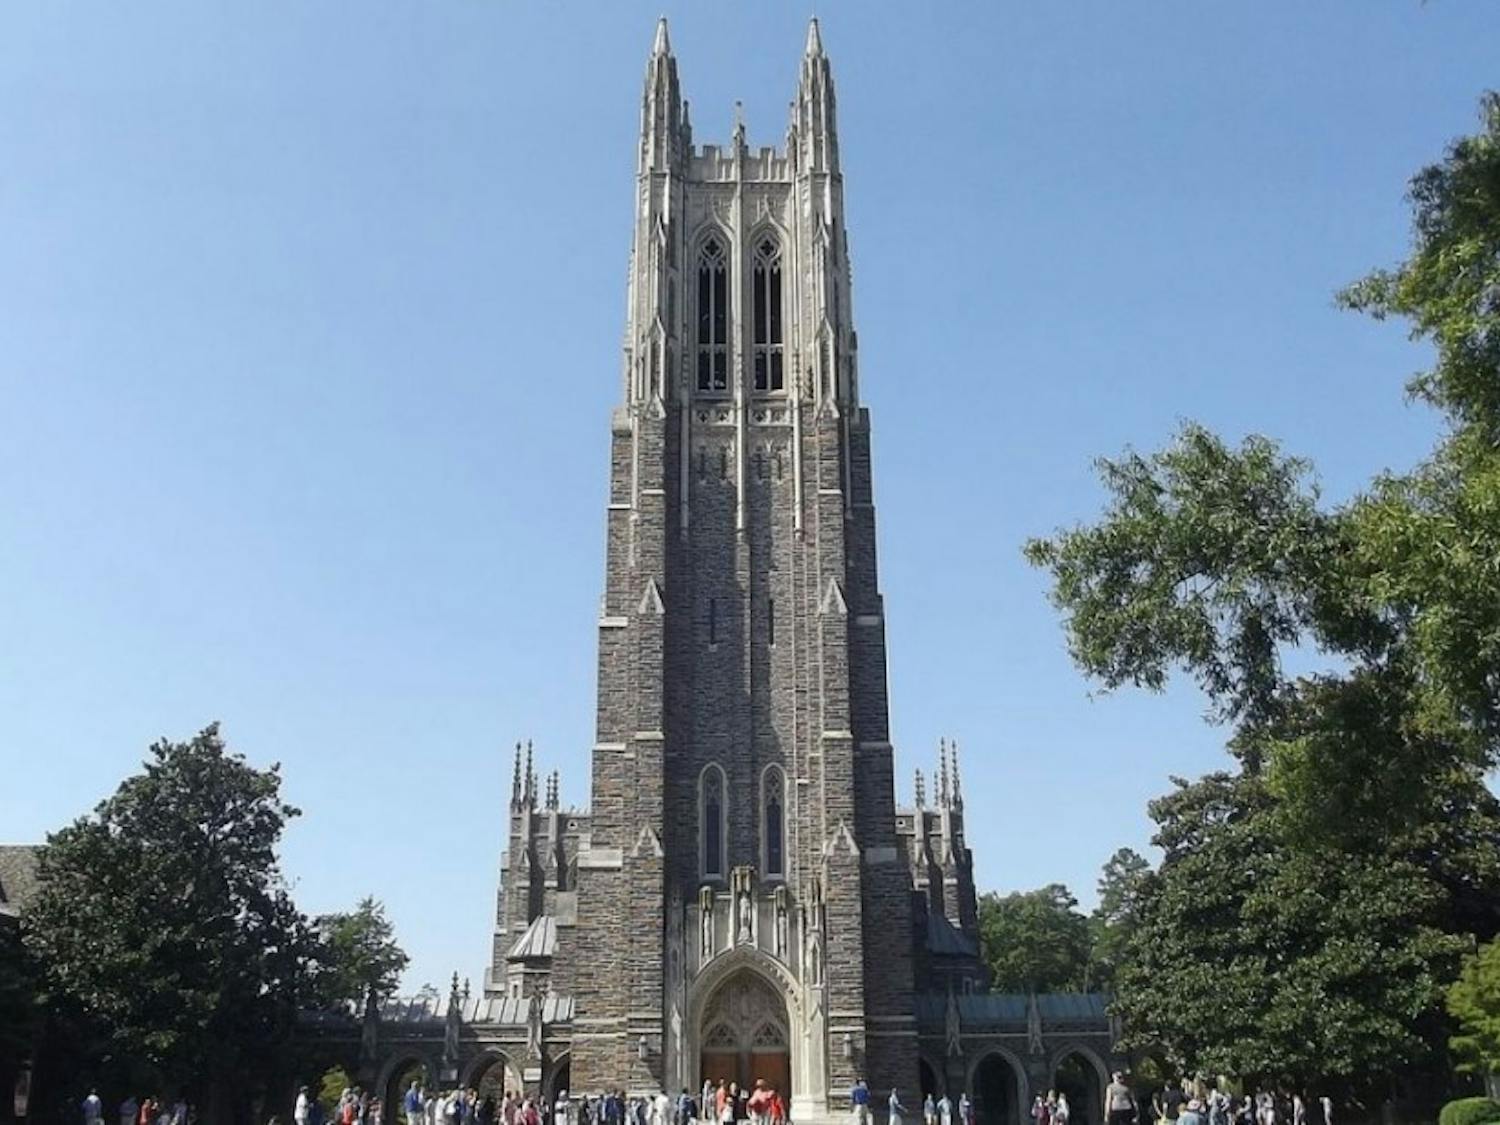 The total cost for&nbsp;attending Duke during the 2017-18&nbsp;academic year&mdash;including tuition, room, board and fees&mdash;will be $68,298.